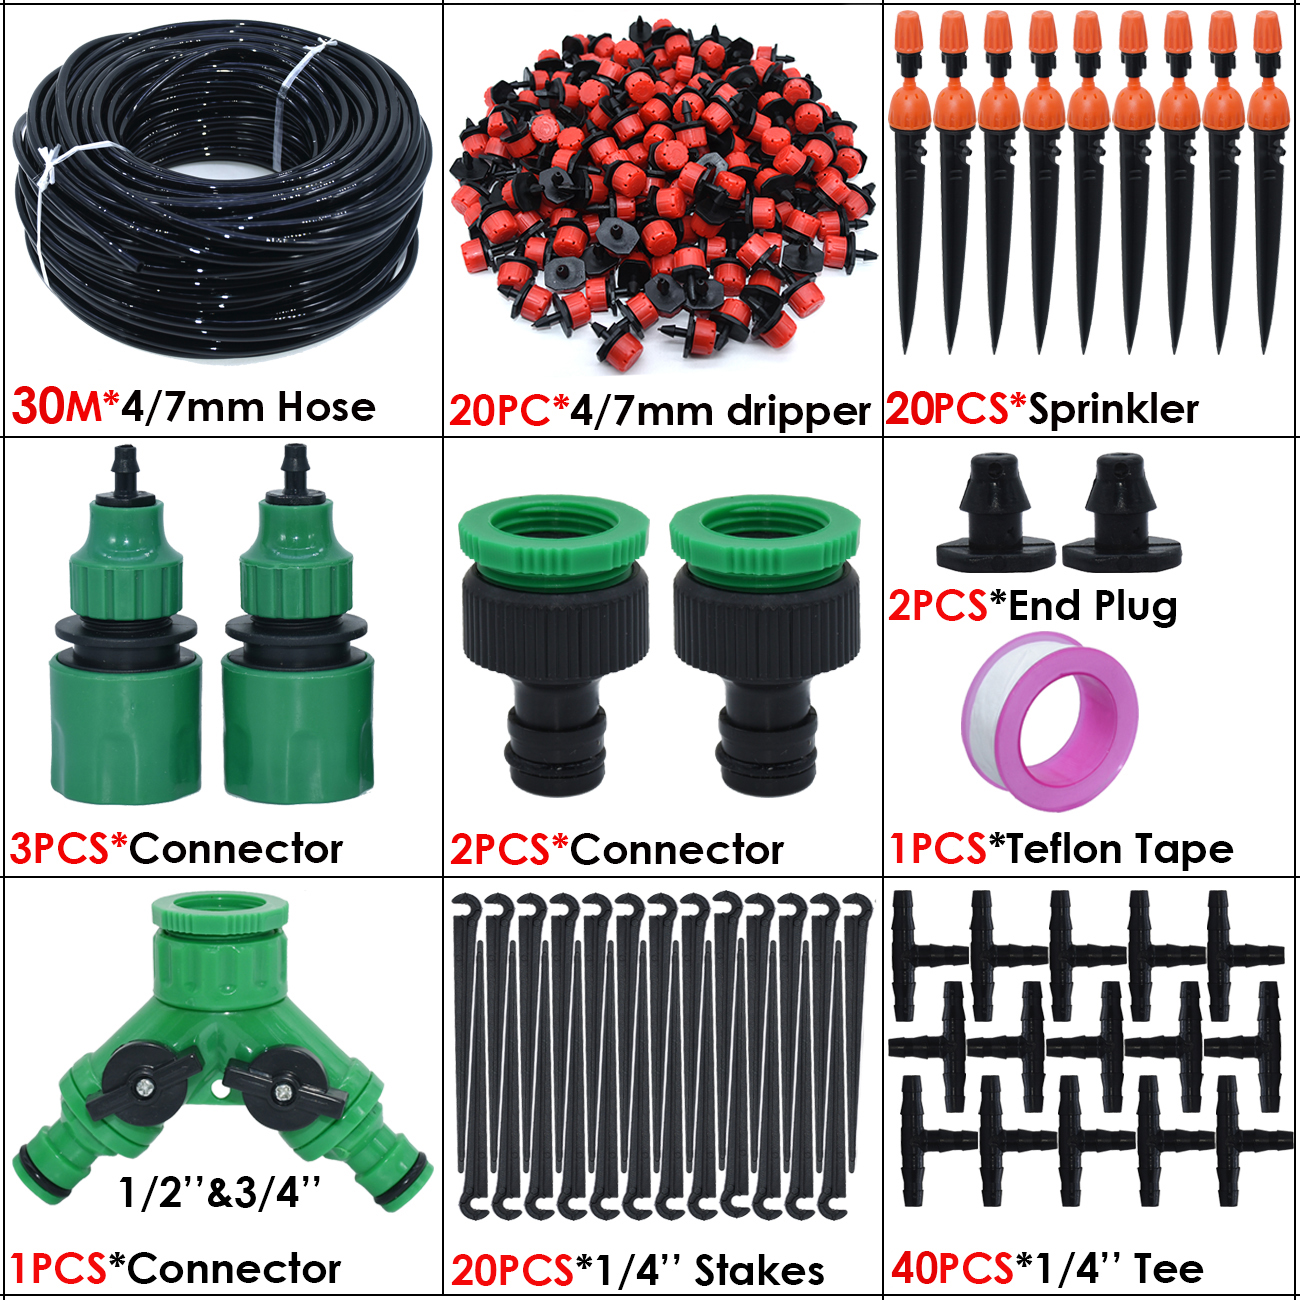 KESLA 5M-30M Drip Irrigation Watering Kits System Garden Greenhouse Automatic Adjustable Drippers 8 Outlets Sprinkler 4/7mm Hose